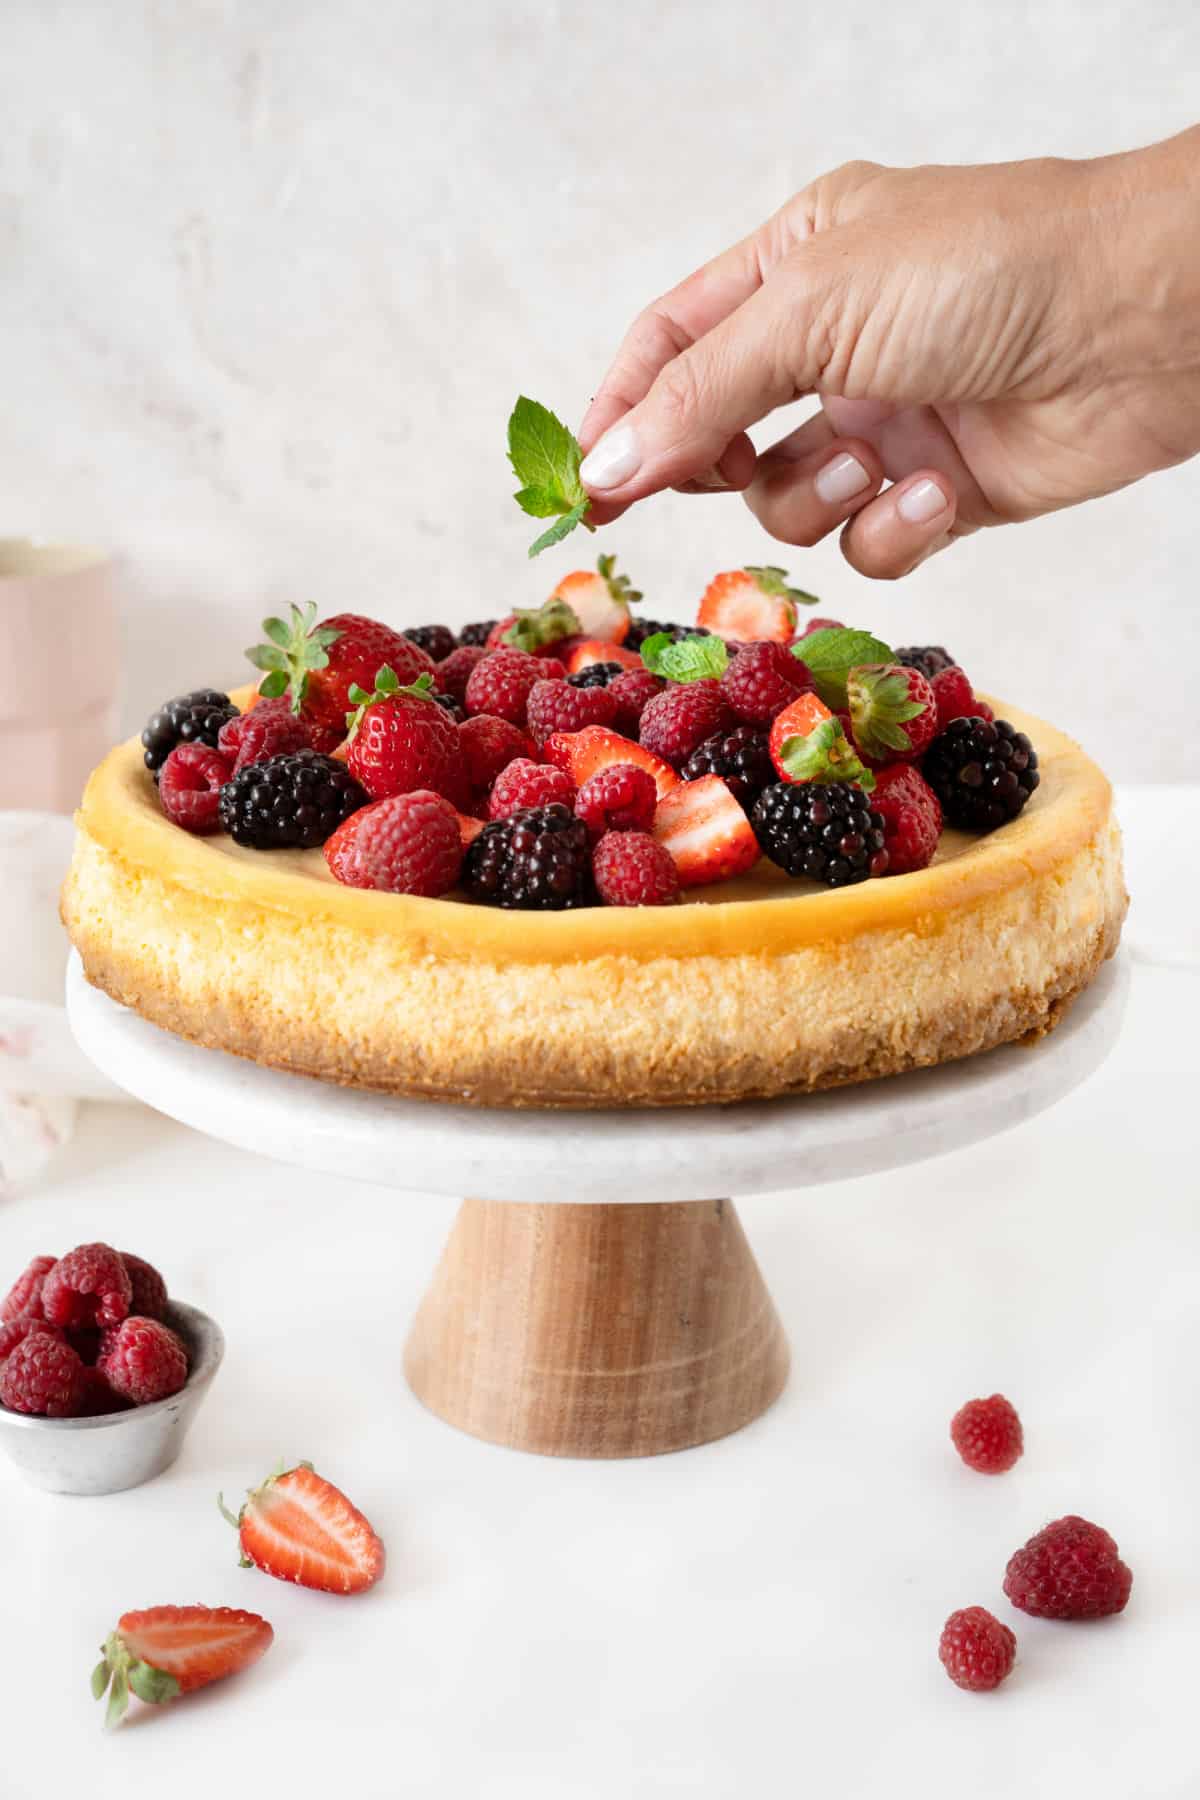 Hand placing a mint sprig on fresh berries piled atop a ricotta cheesecake on a cake stand. White surface and grey background. 